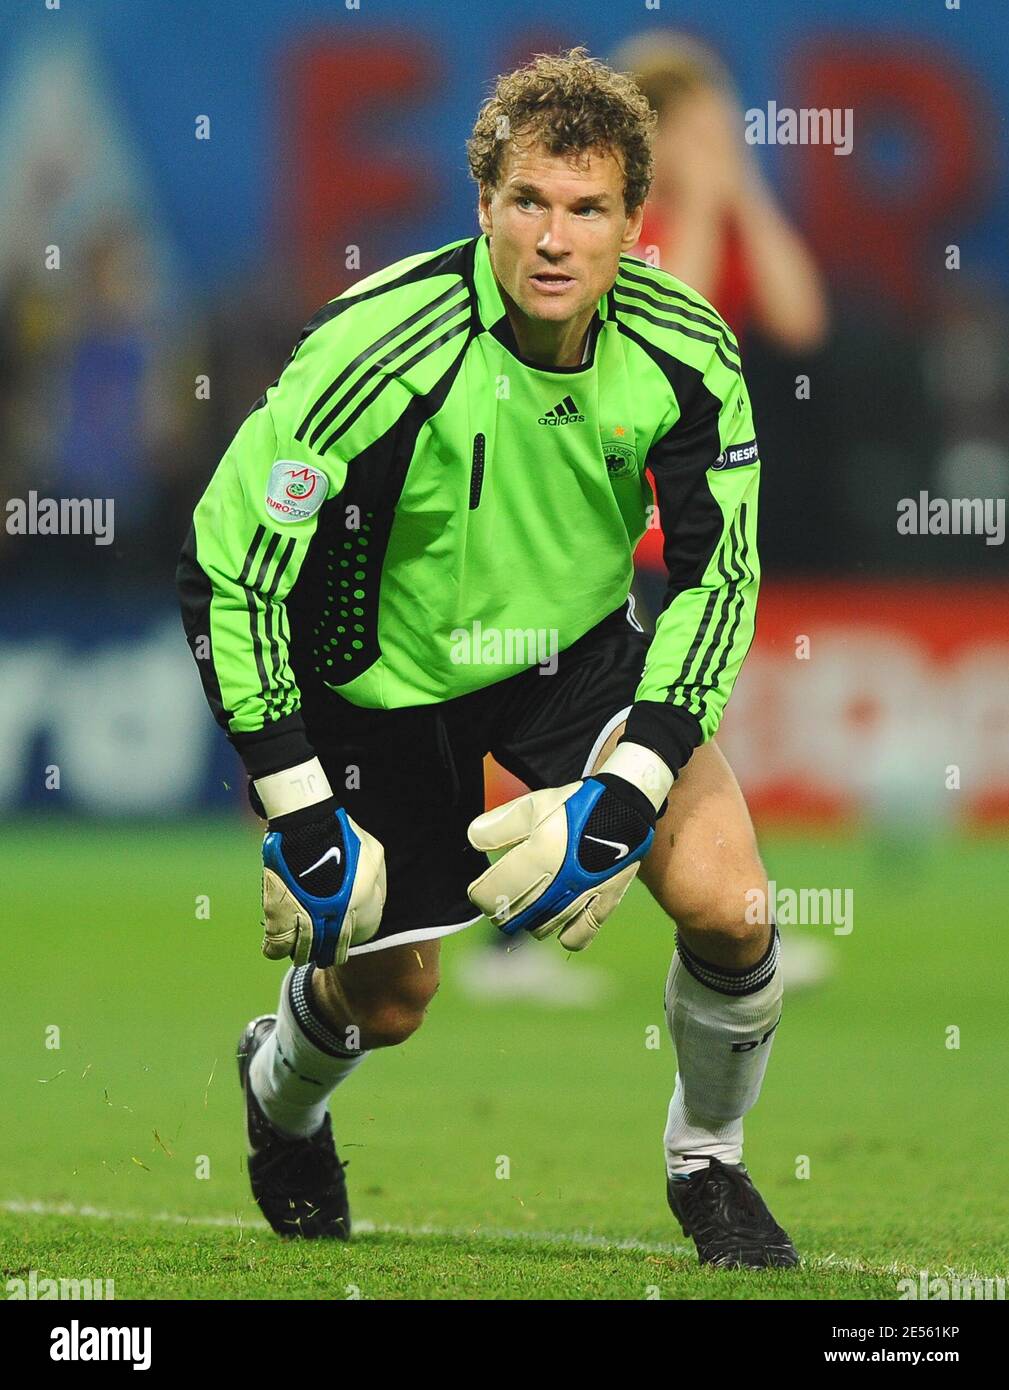 Germany's goalkeeper Jens Lehmann during the UEFA EURO 2008 Final match between Spain vs Germany at Ernst Happel Stadion in Vienna, Austria on June 29, 2008. Spain won 1-0. Photo by Steeve McMay/Cameleon/ABACAPRESS.COM Stock Photo